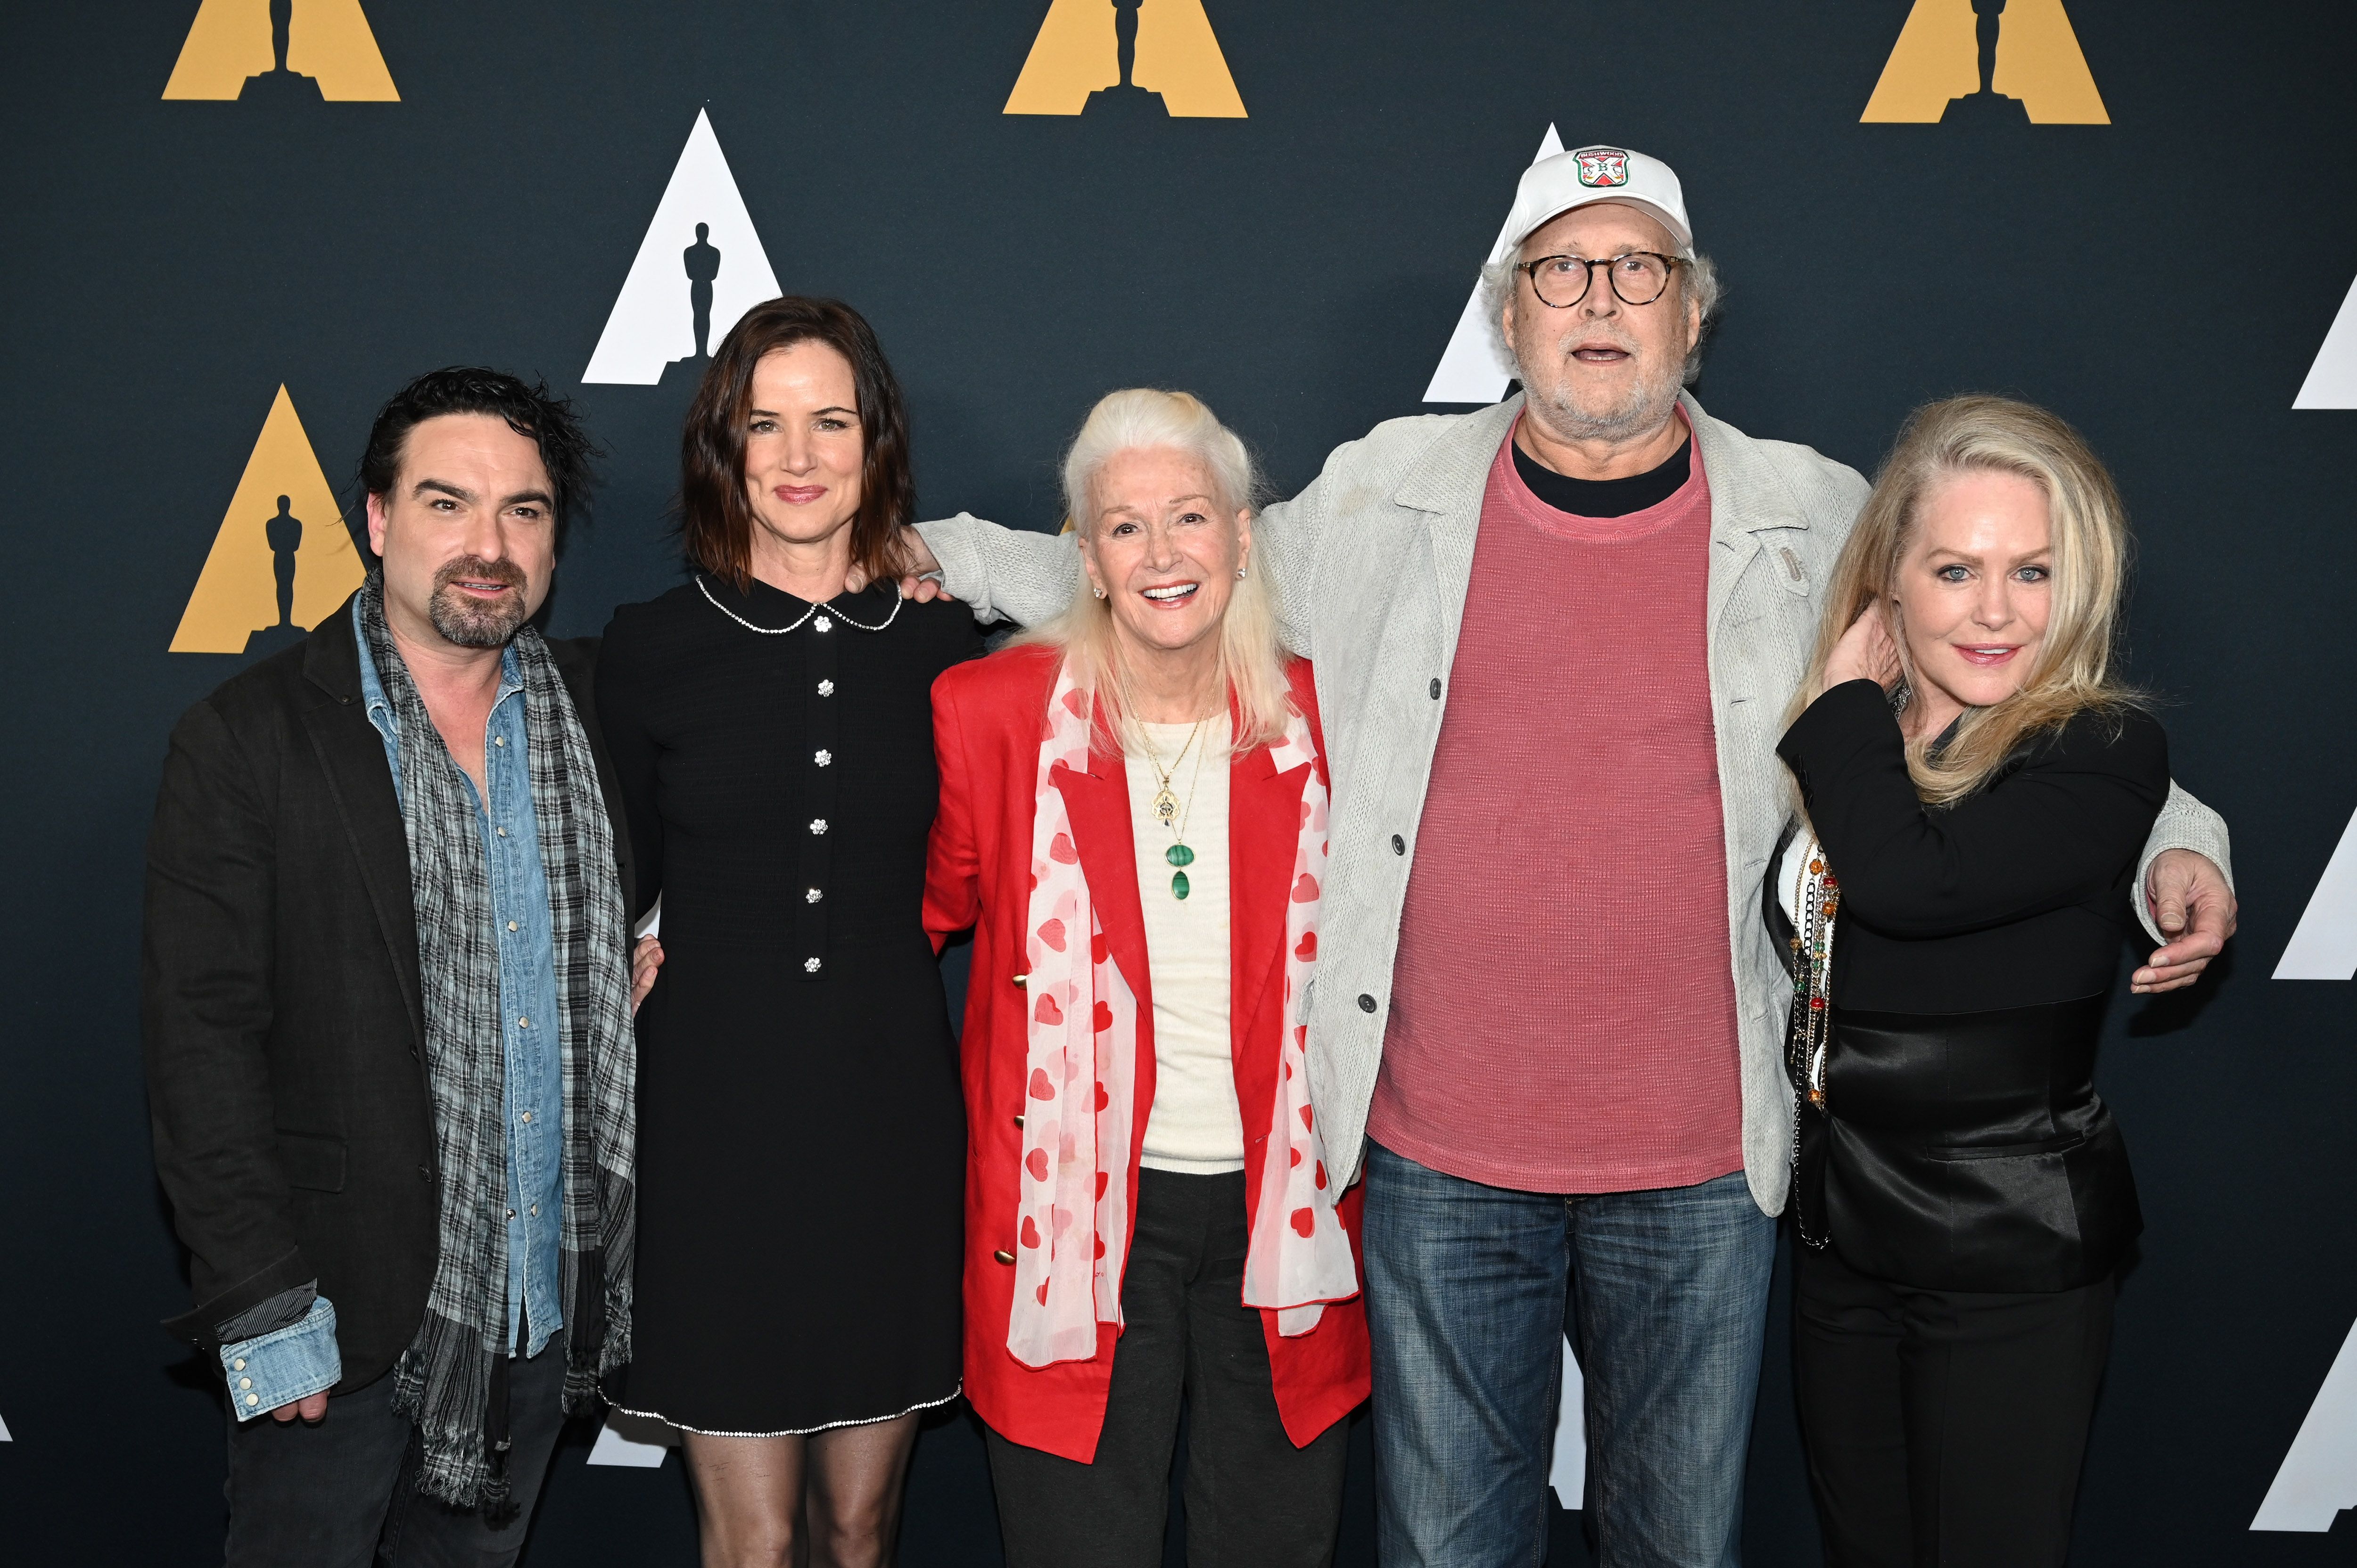 Johnny Galecki, Juliette Lewis, Diane Ladd, Chevy Chase, and Beverly D'Angelo attend the Academy of Motion Picture Arts and Sciences 30th-anniversary screening of "National Lampoons Christmas Vacation" in Beverly Hills on December 12, 2019. | Source: Getty Images